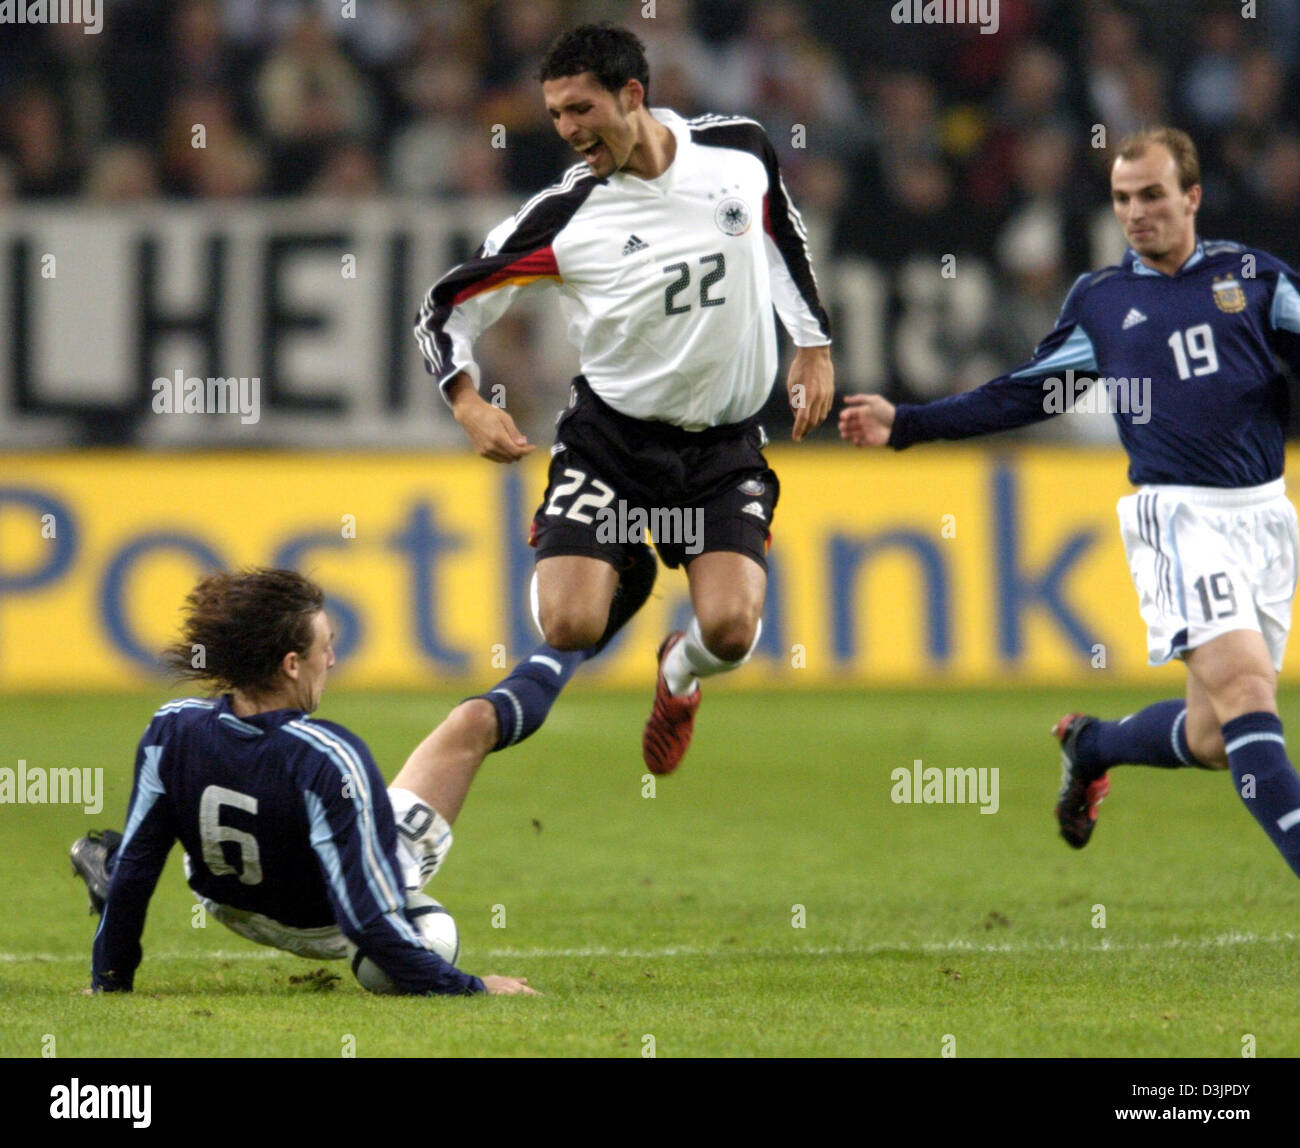 (dpa) - Argentina's Gabriel Heinze (L) fouls Germany's Kevin Kuranyi (C), while Heinze's teammate Esteban Cambiasso looks on during the international friendly between Germany and Argentina at the LTU arean in Duesseldorf, Germany, 09 February 2005. Stock Photo